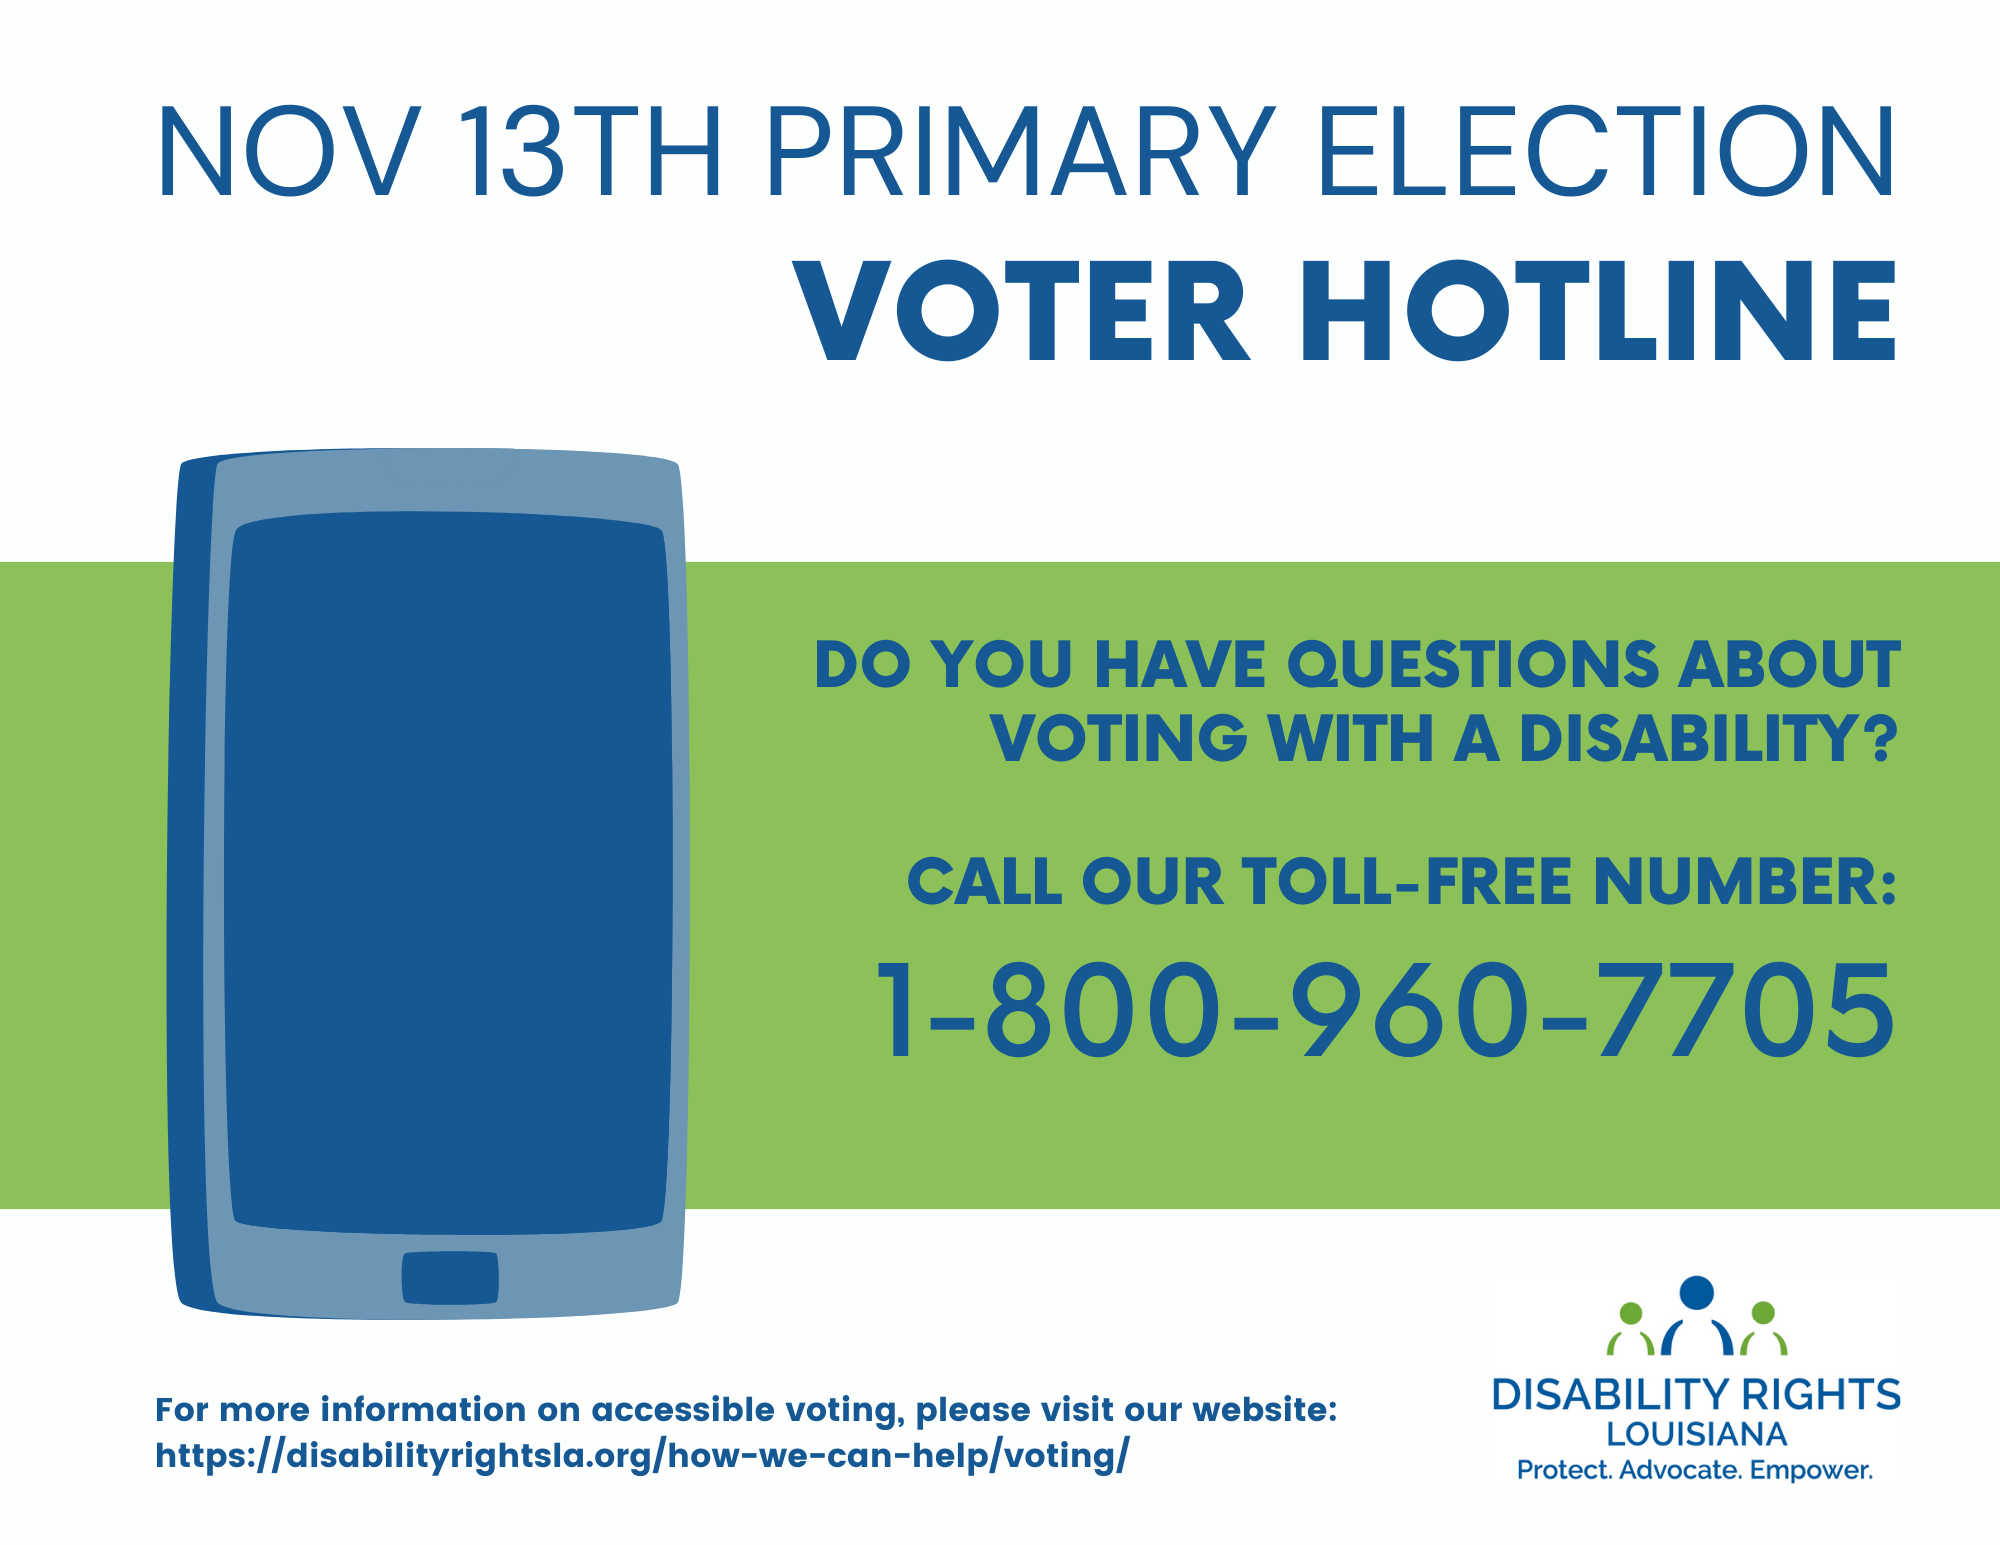 Text reads: Nov 13th Primary Election Voter Hotline Do You have questions about voting with a disability? Call our toll-free number: 1-800-960-7705. To the left of the text is an image of a large, blue icon of a mobile phone. Under that the text reads: For more information on accessible voting, please visit our website: https://disabilityrightsla.org/how-we-can-help/voting/ At bottom right is the Disability Rights Logo, containing two green figures centered by a blue figure over the words "Protect. Advocate. Empower."